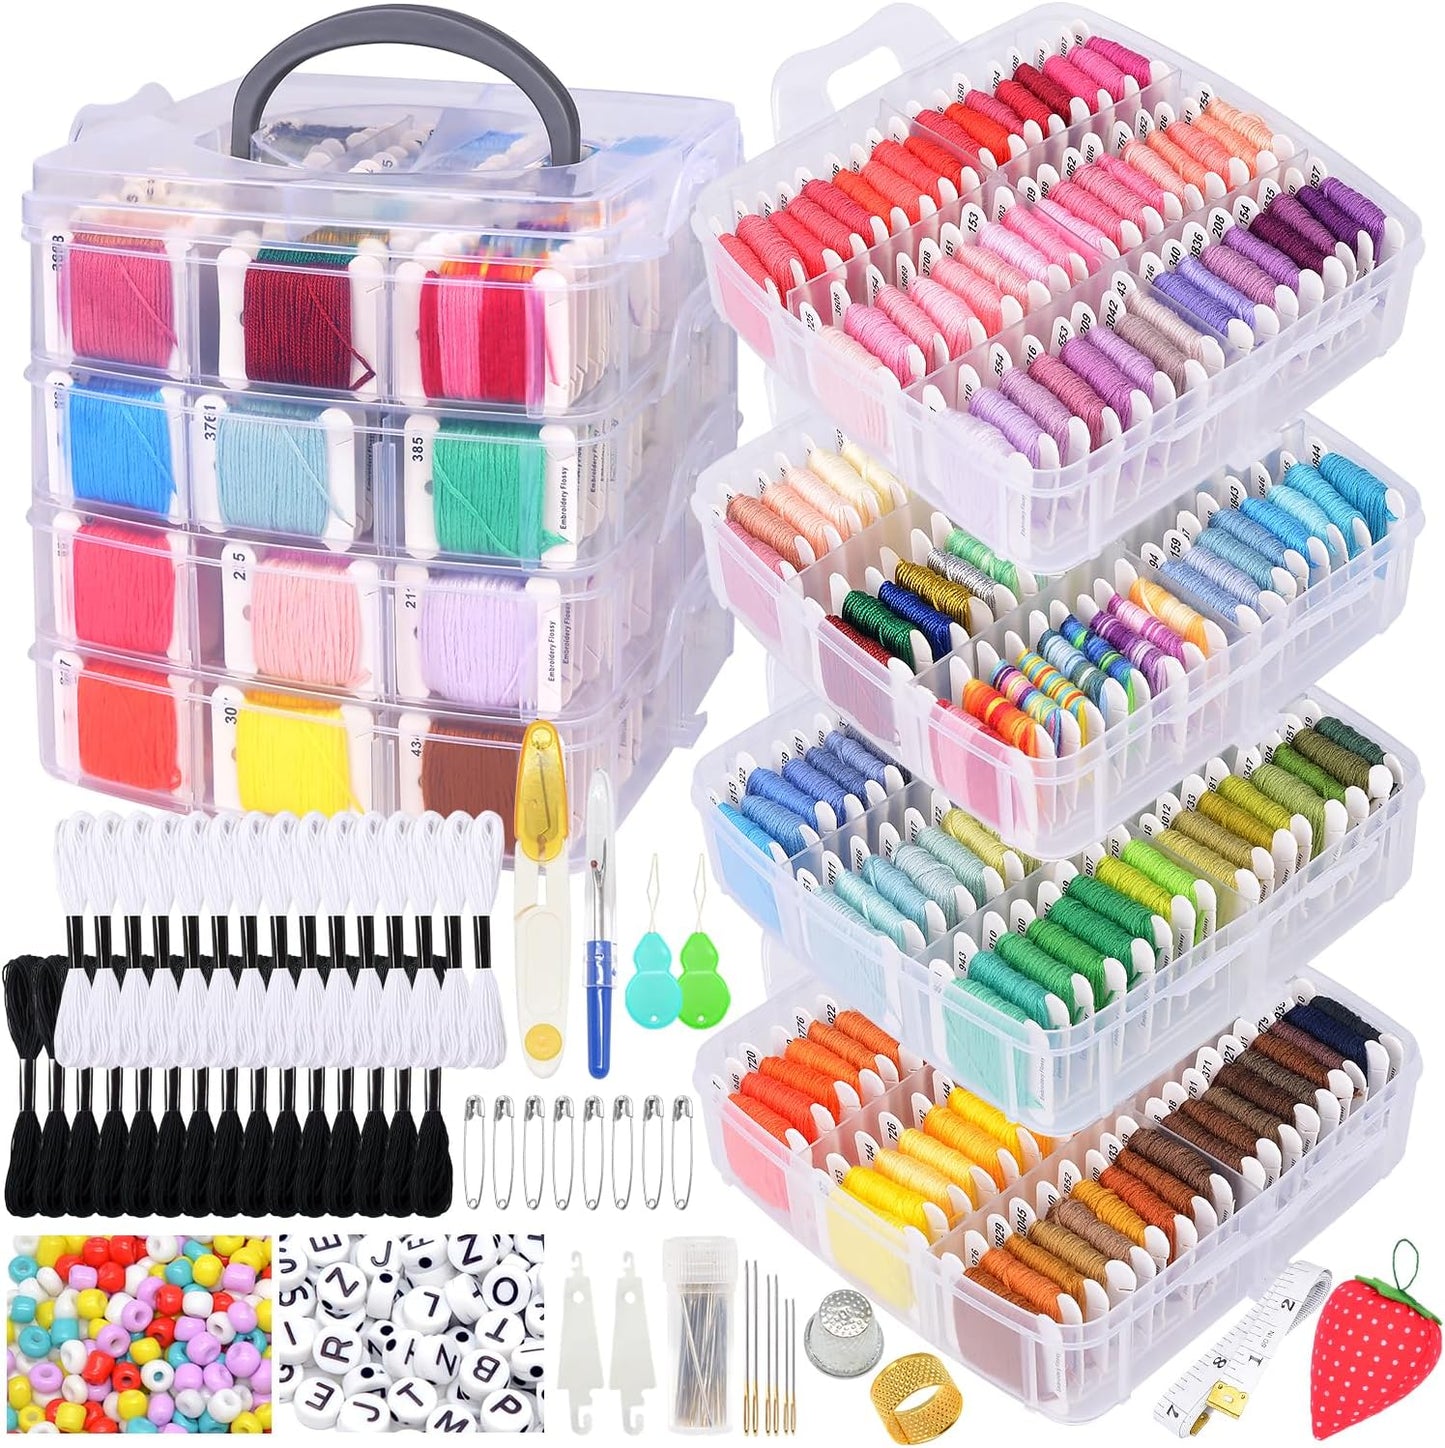 Embroidery Thread Kit Including 200 Skeins Embroidery Floss 30 Skeins White & Black Embroidery Thread Cross Stitch Tool for Friendship Bracelets Arts DIY Crafts with 4-Tier Transparent Box